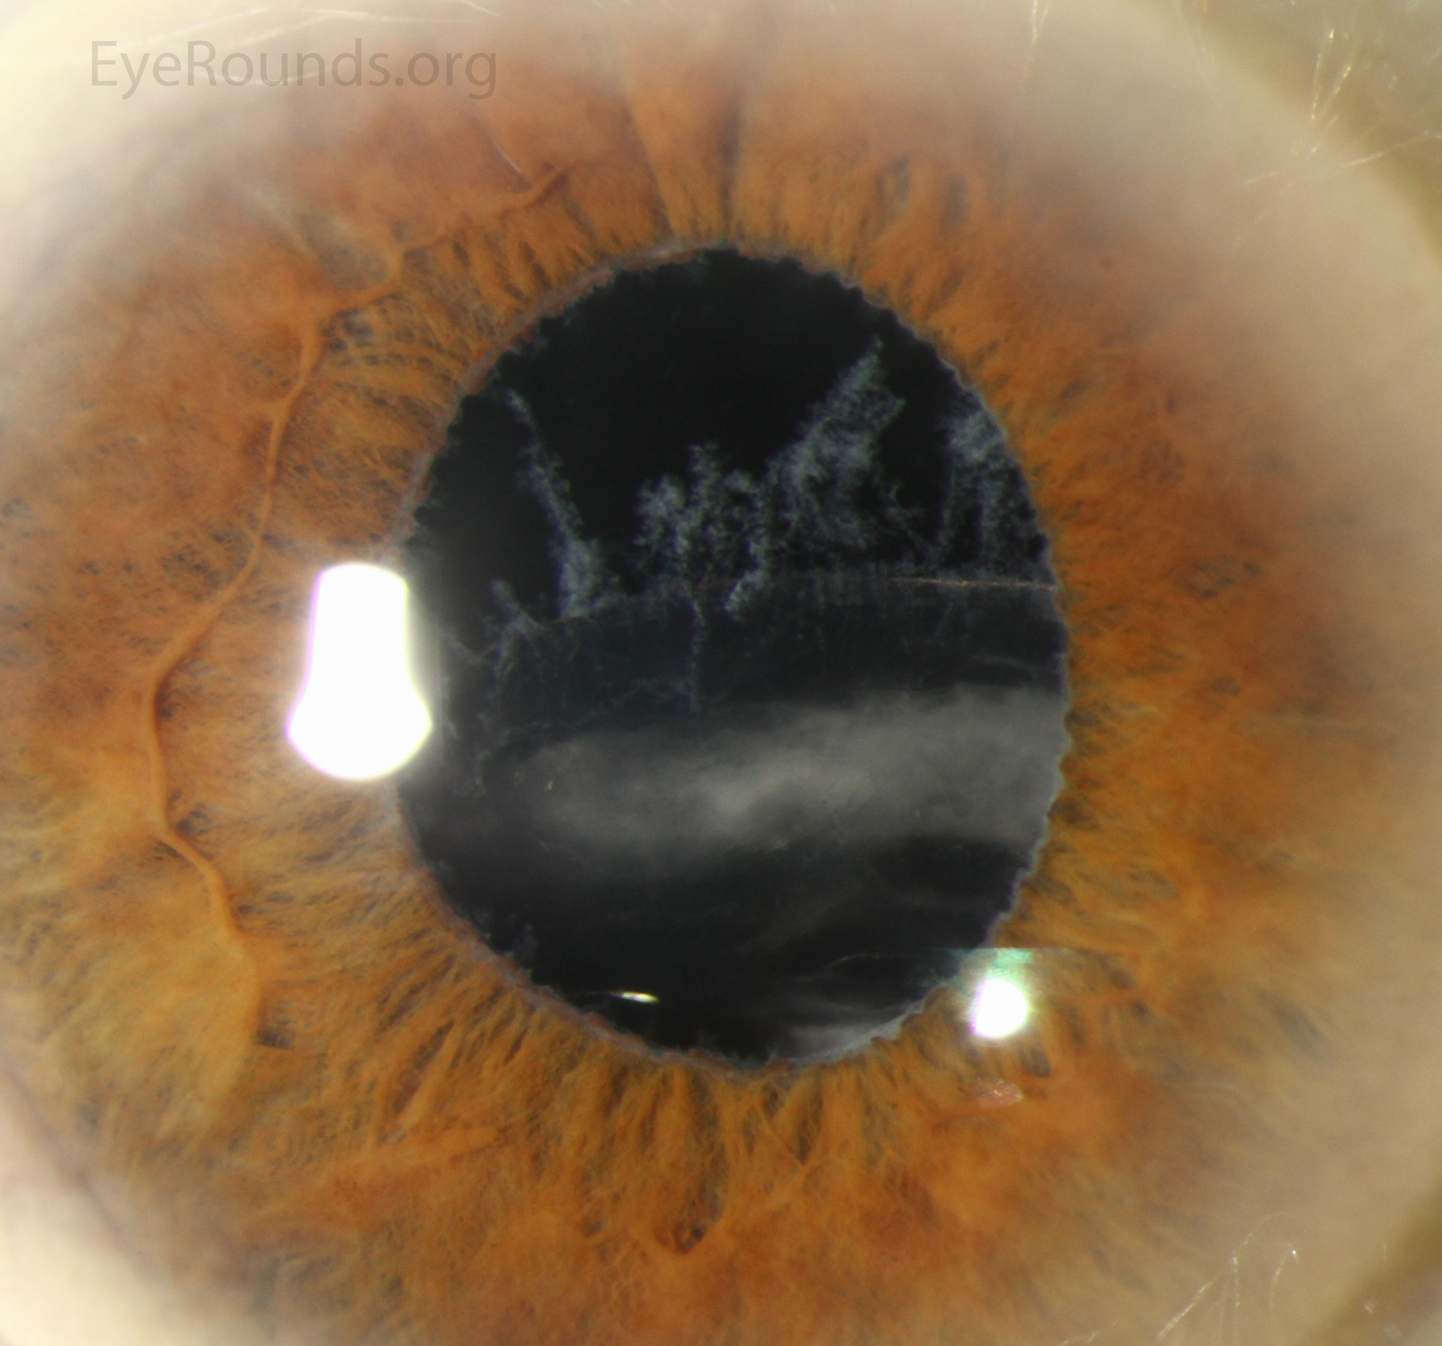 Inferiorly displaced posterior chamber intraocular lens located in the capsular bag